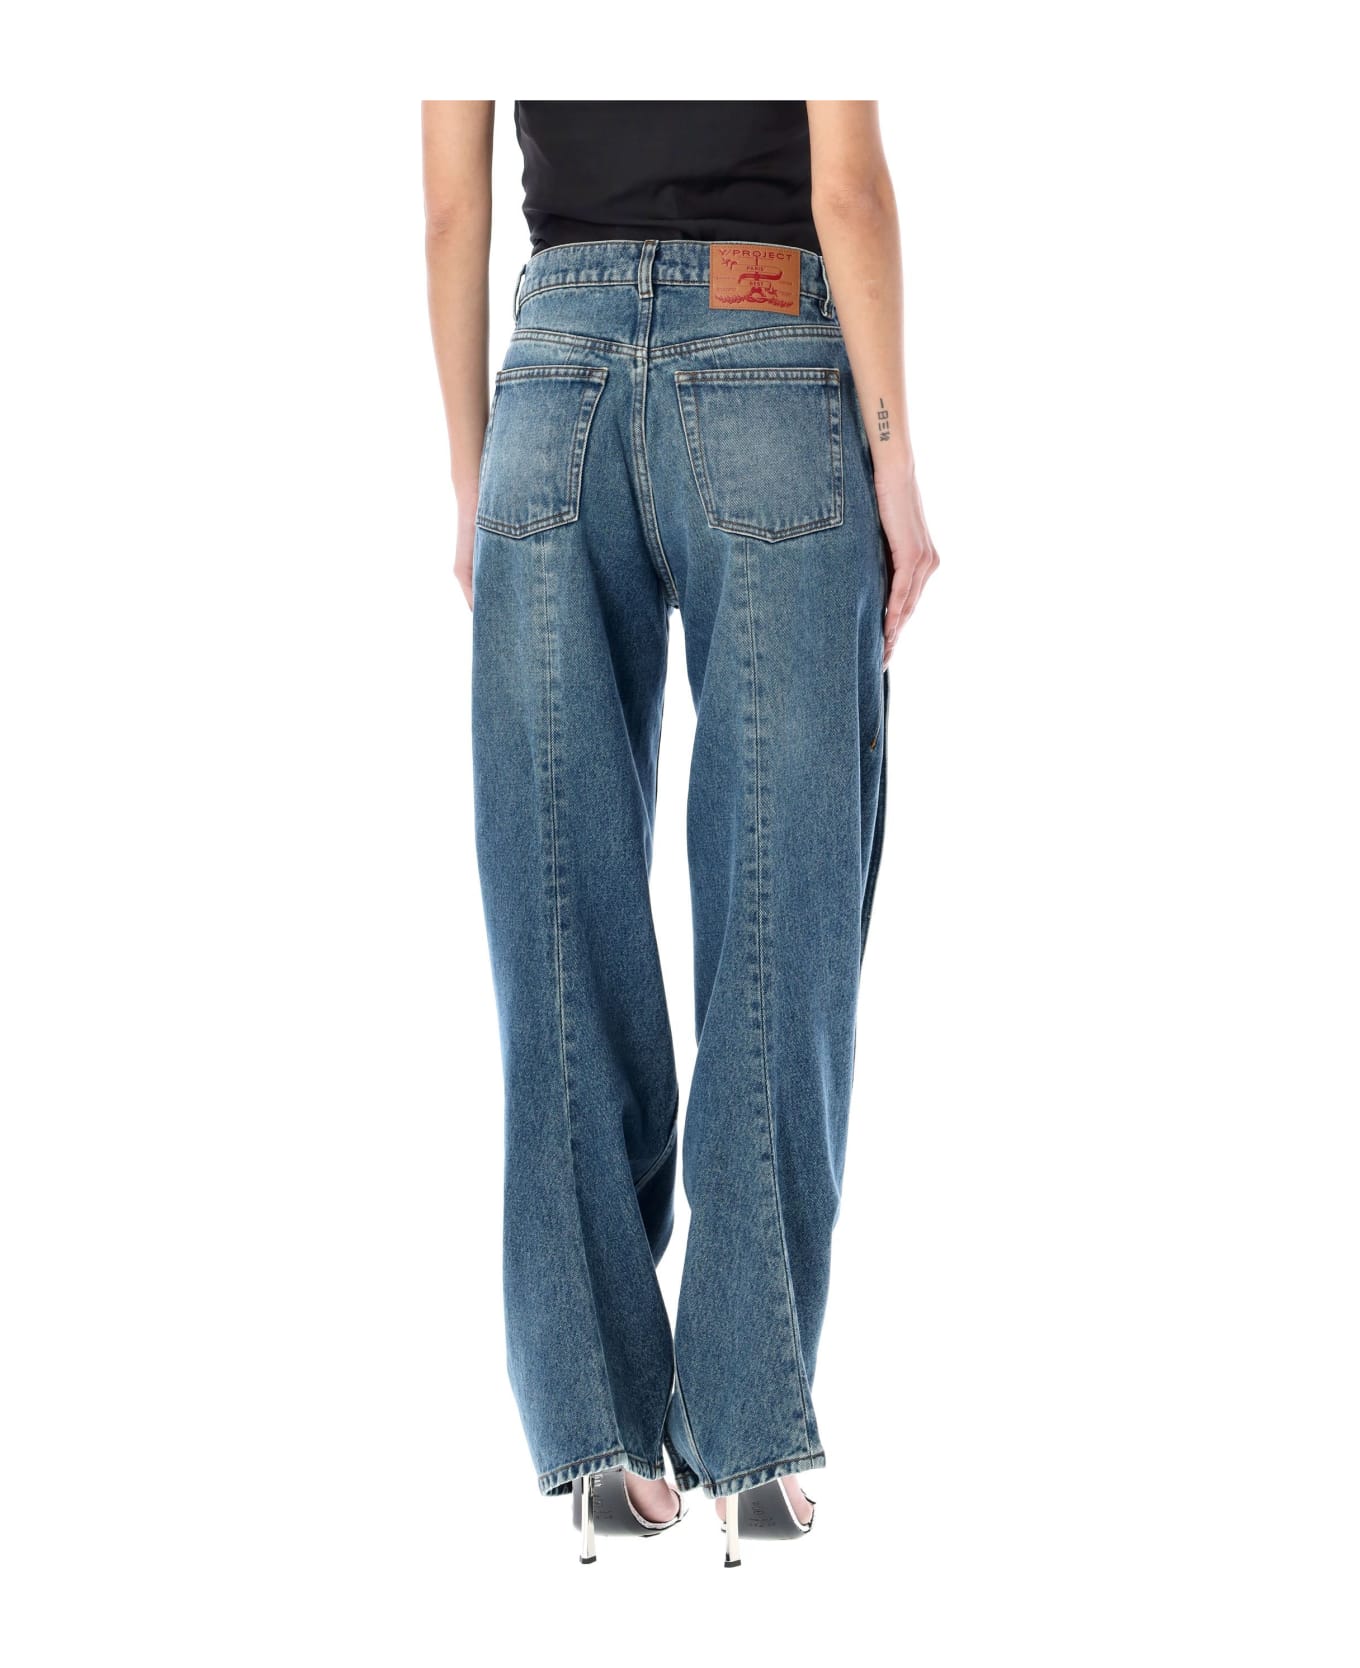 Y/Project Evergreen Banana Jeans - EVERGREEN VINTAGE BLUE name:463